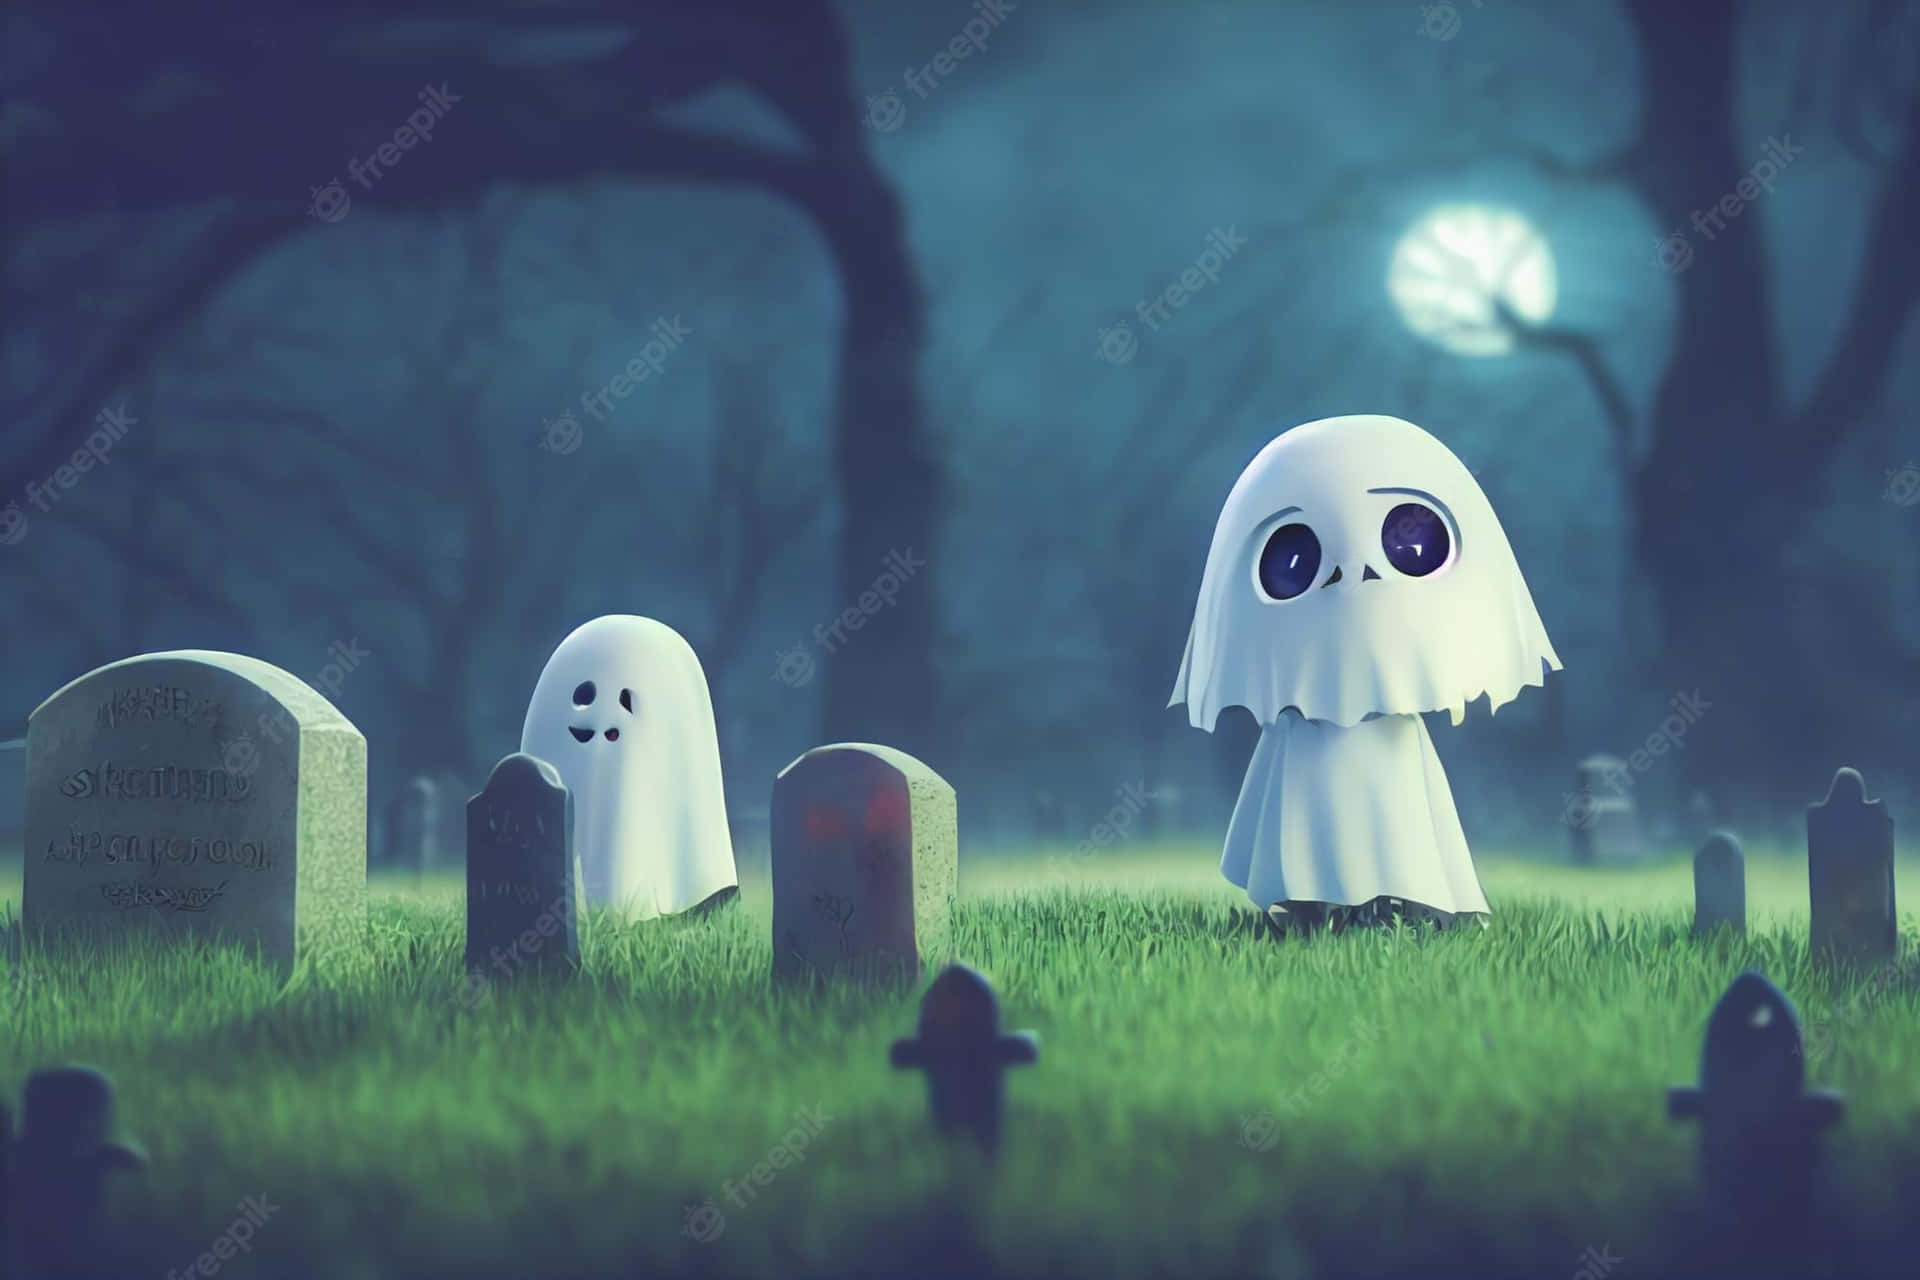 Boo! Even Ghosts Need Love Wallpaper